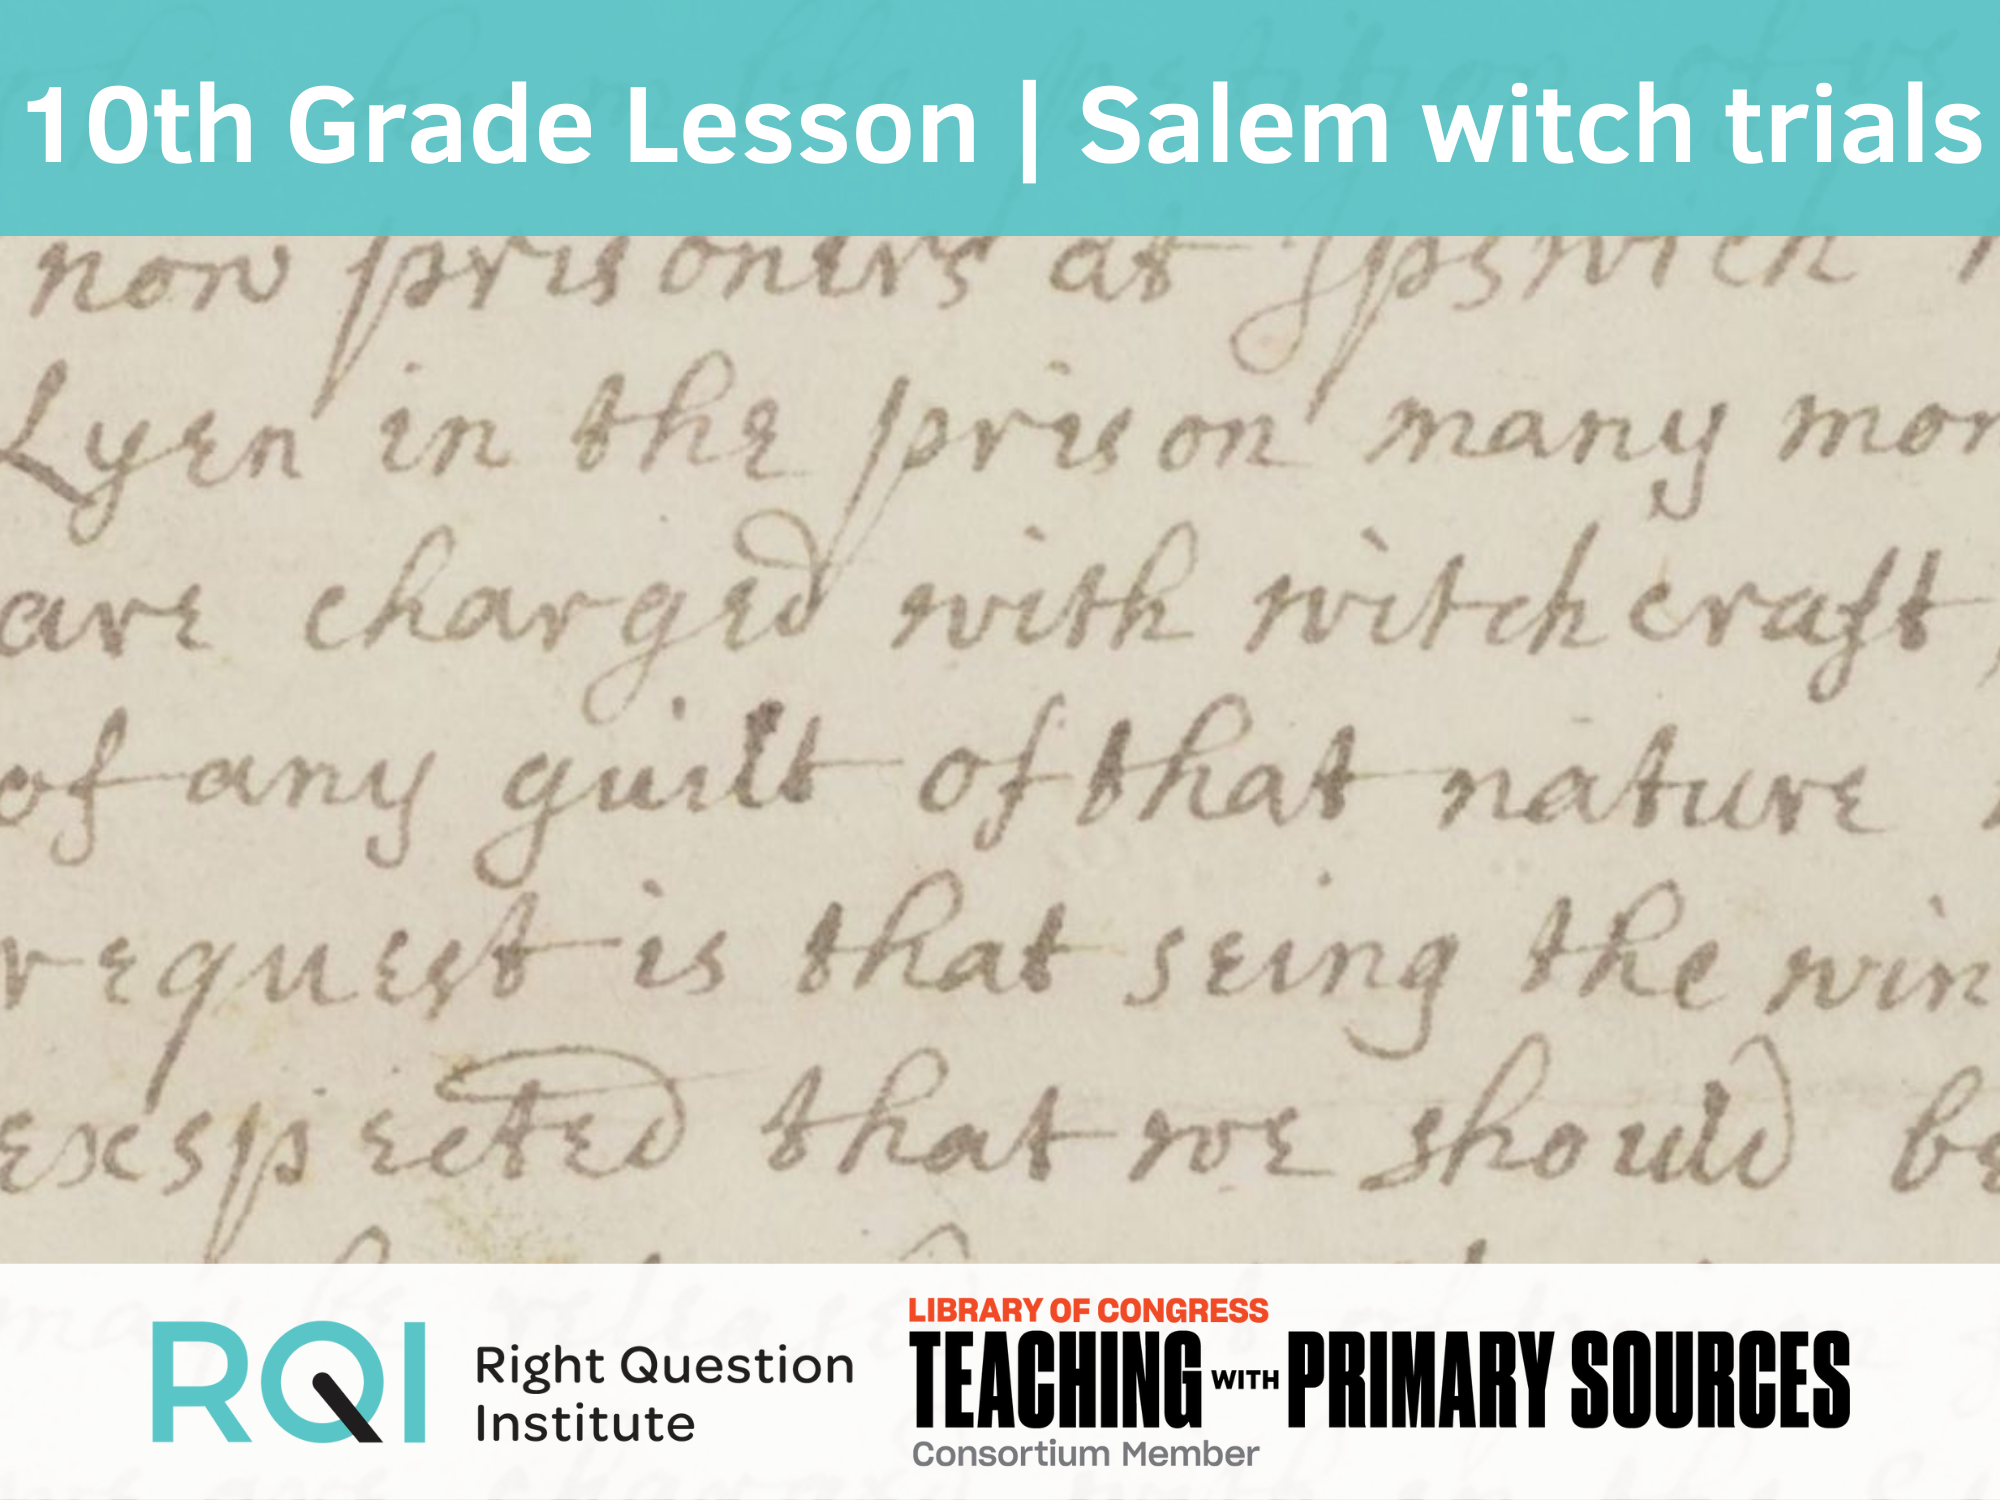 Lesson Snapshot: QFT & Primary Sources in 10th Grade English Class